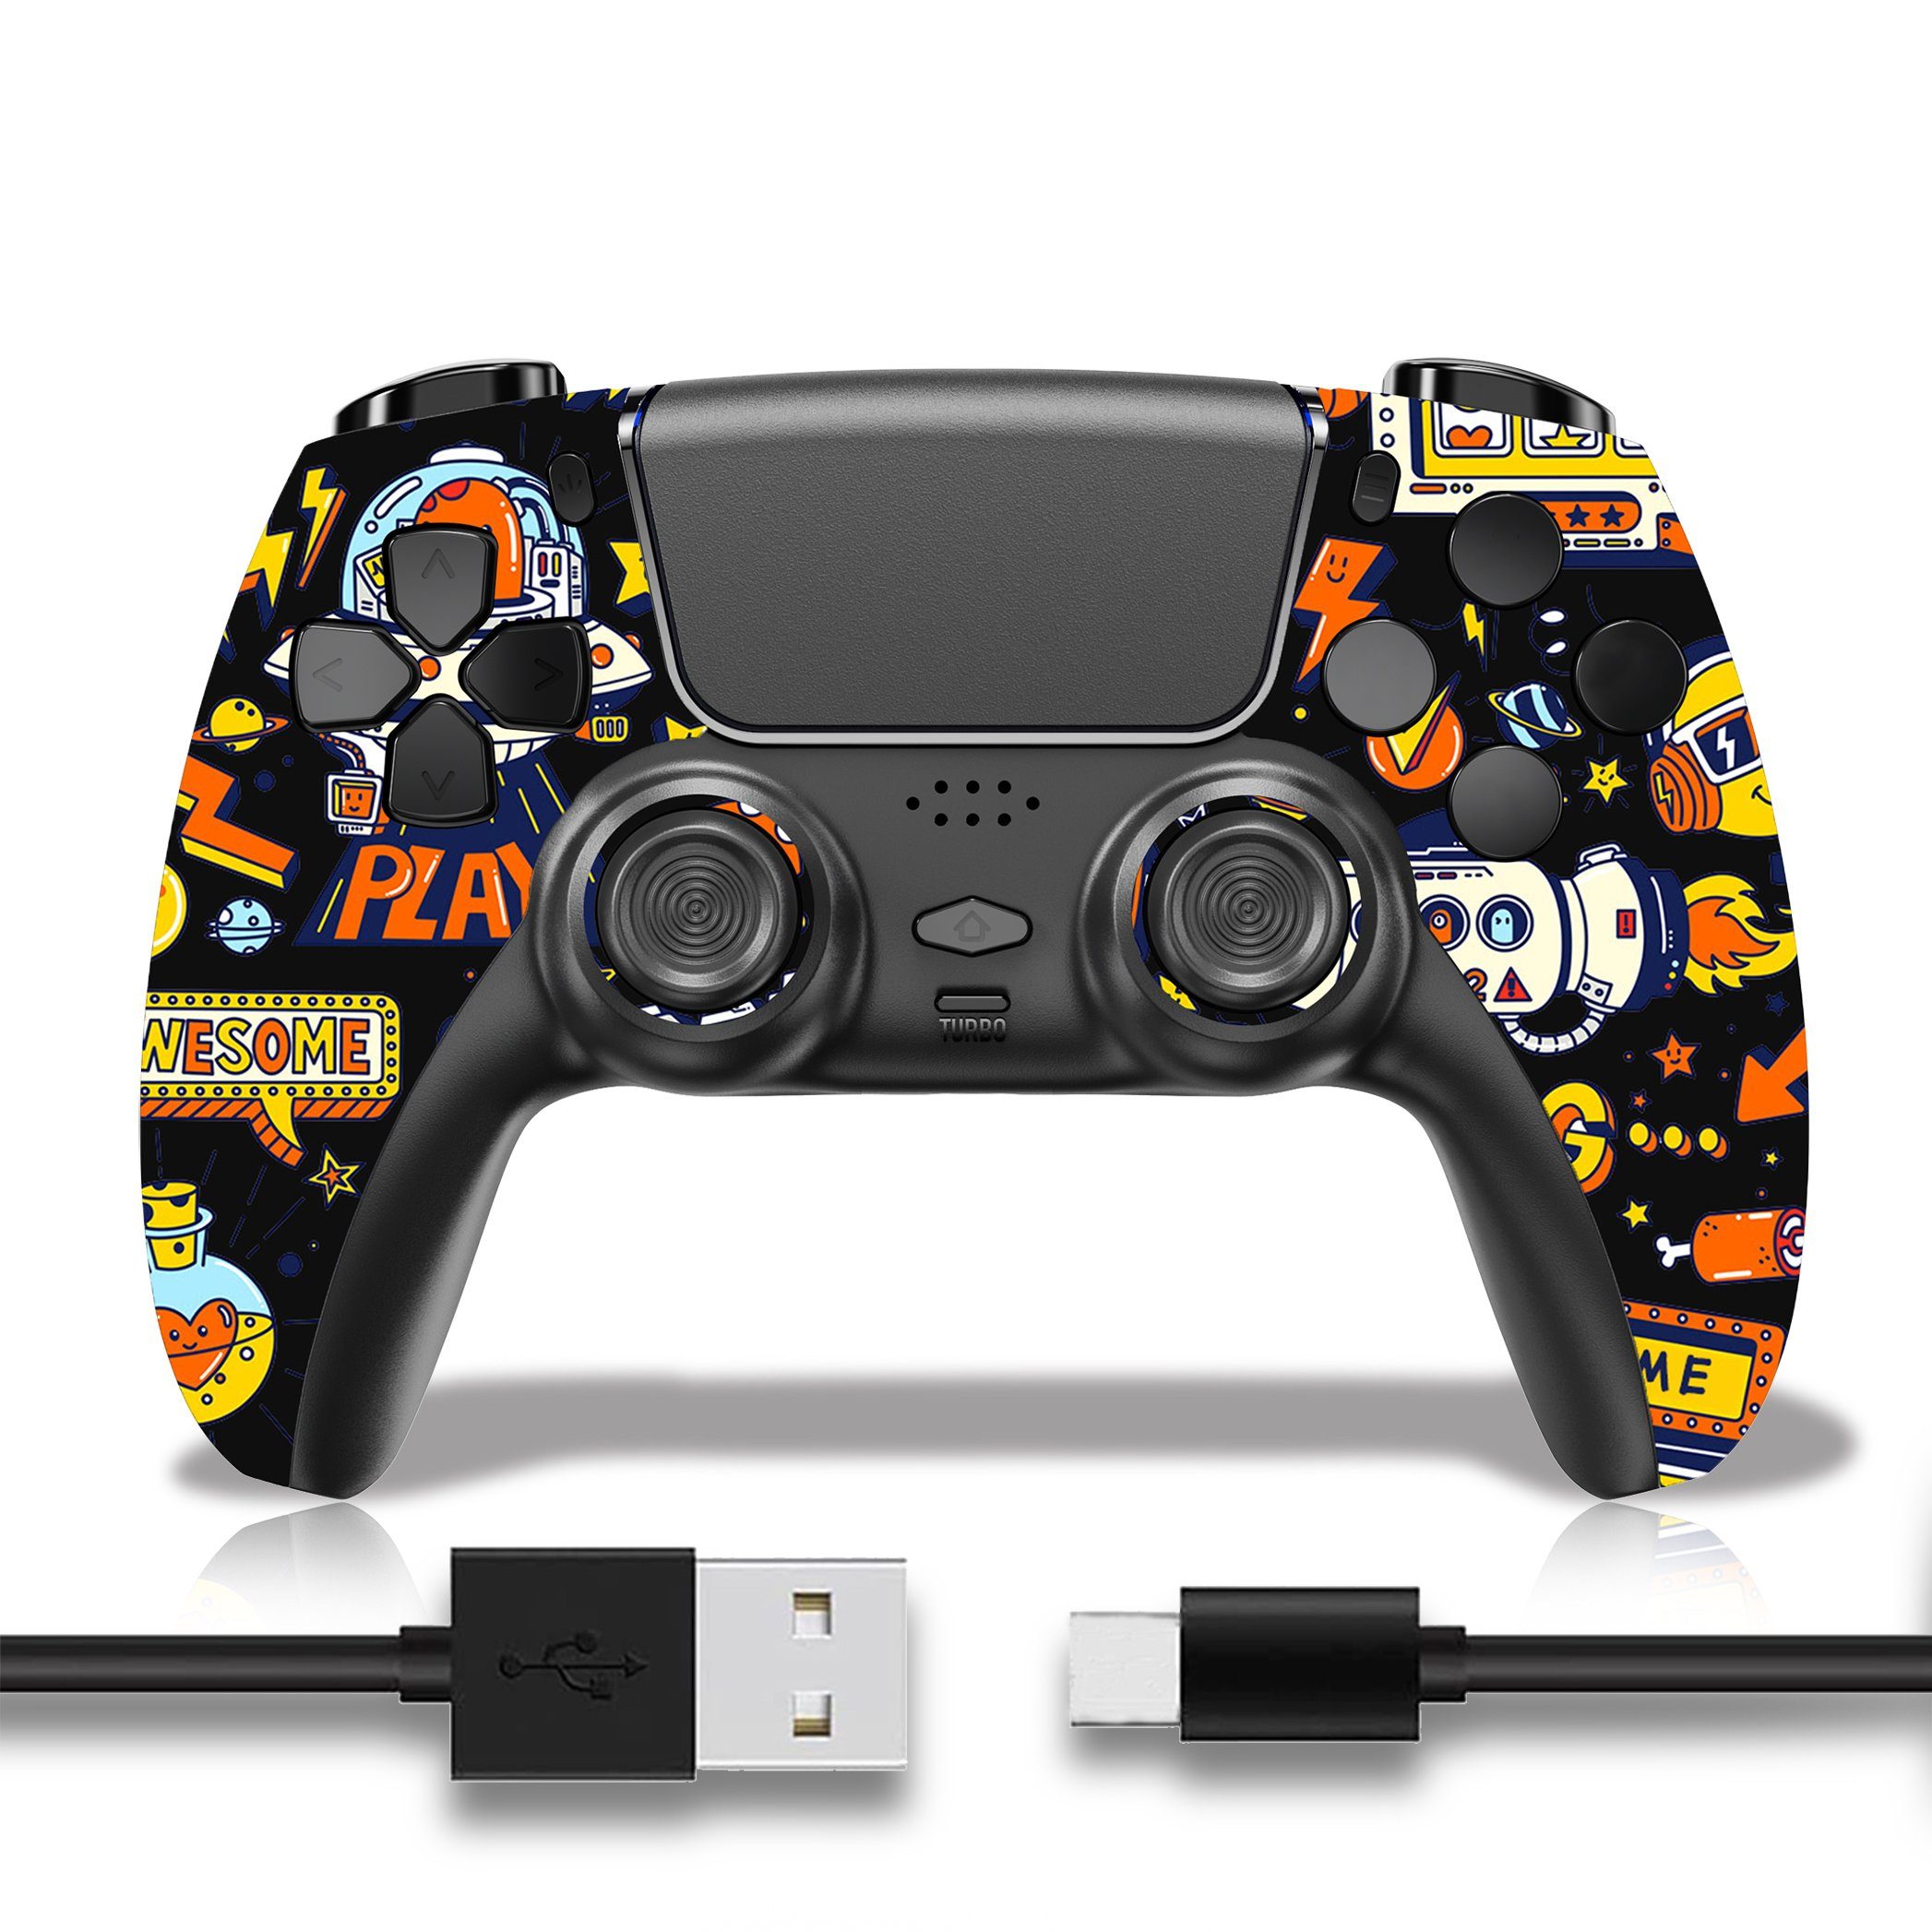 Tadow Wireless Gamepad, Controller, für PS4, Bluetooth, Retro-Maschine  PlayStation 4-Controller (kompatibel mit PS3/PS4 /SWITCH/Android/IOS/PC/TV-Box)